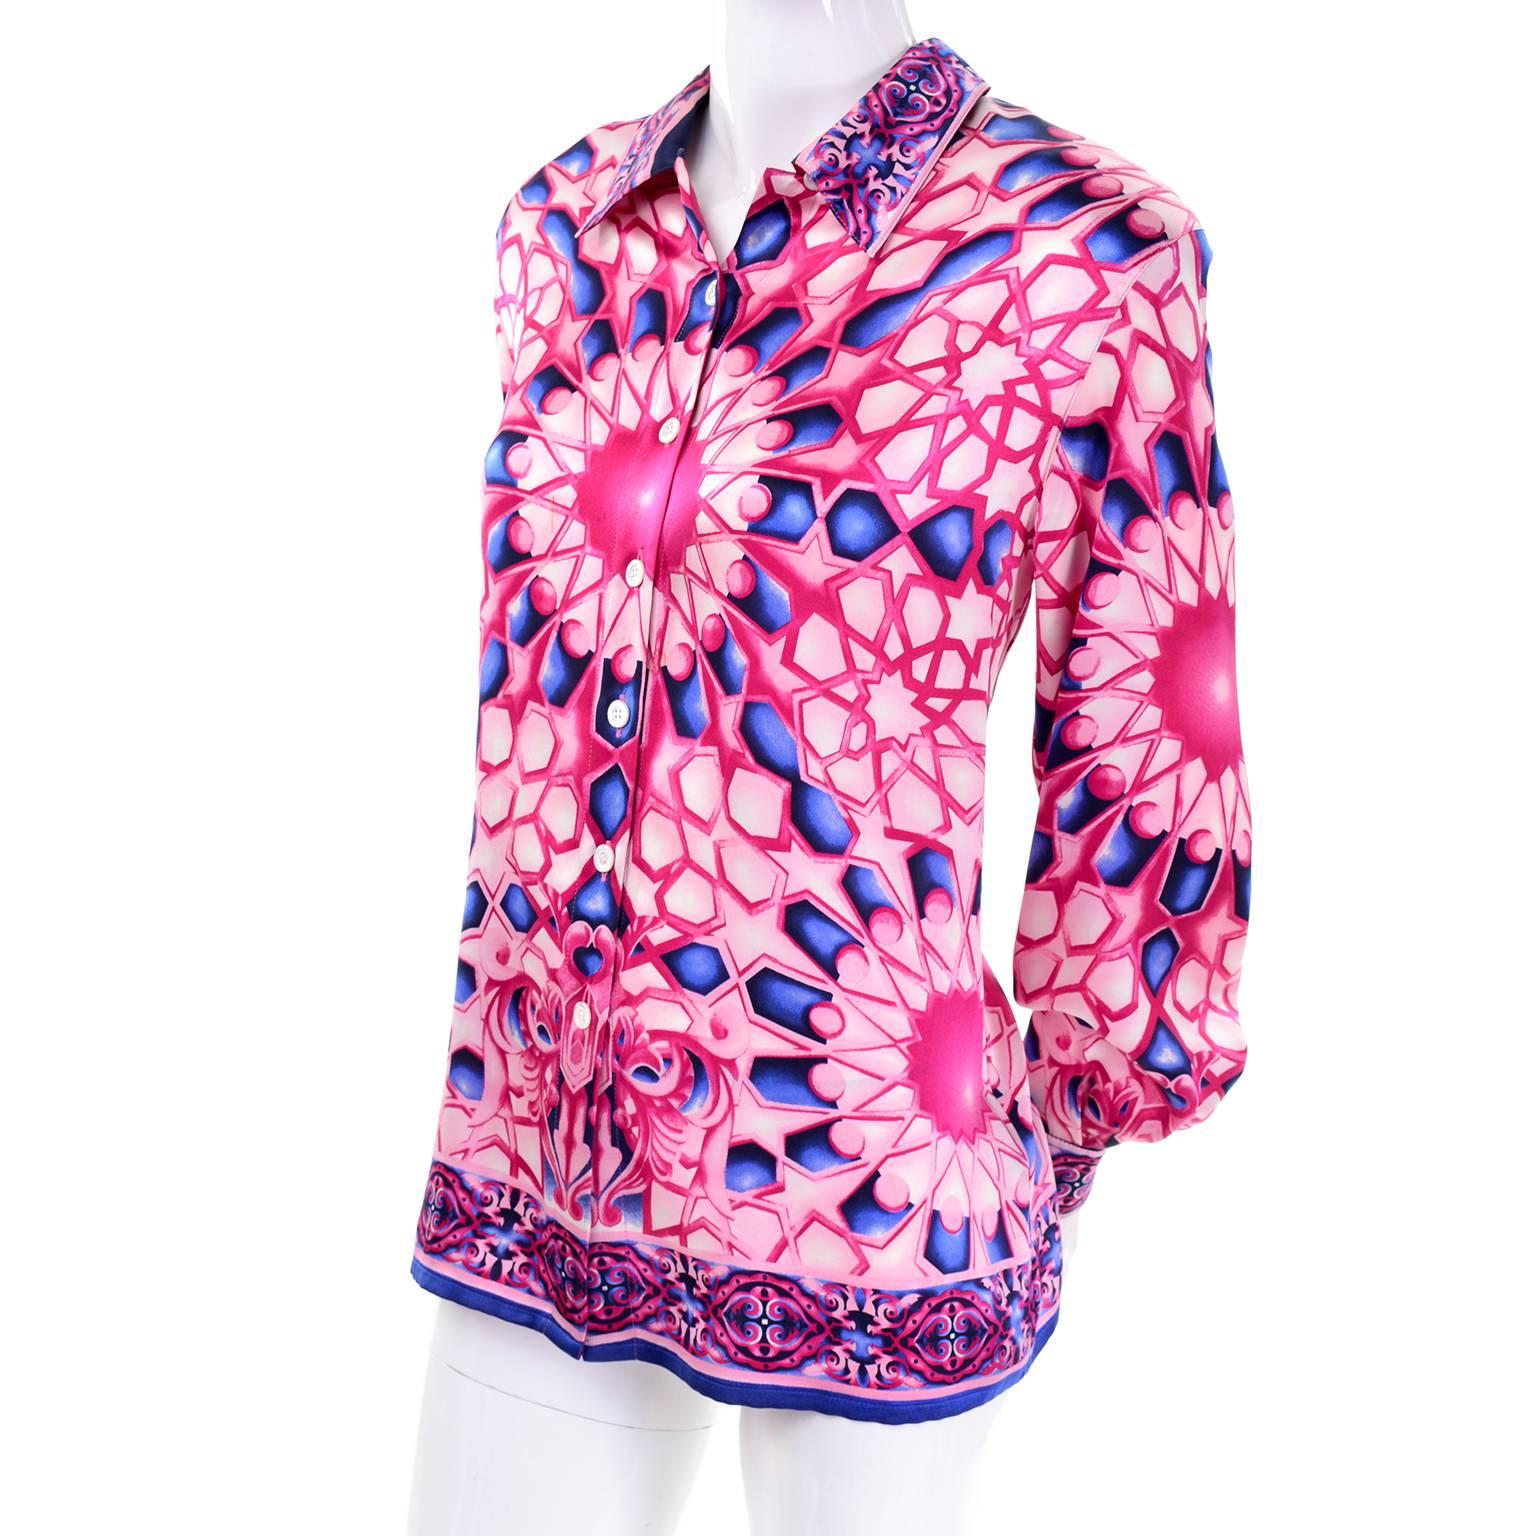 This vintage silk Escada Blouse has a Versace - esque vibe. The luxurious silk fabric has a pink and blue abstract geometric design and is labeled a size 40, and we estimate this would best fit a modern size 40